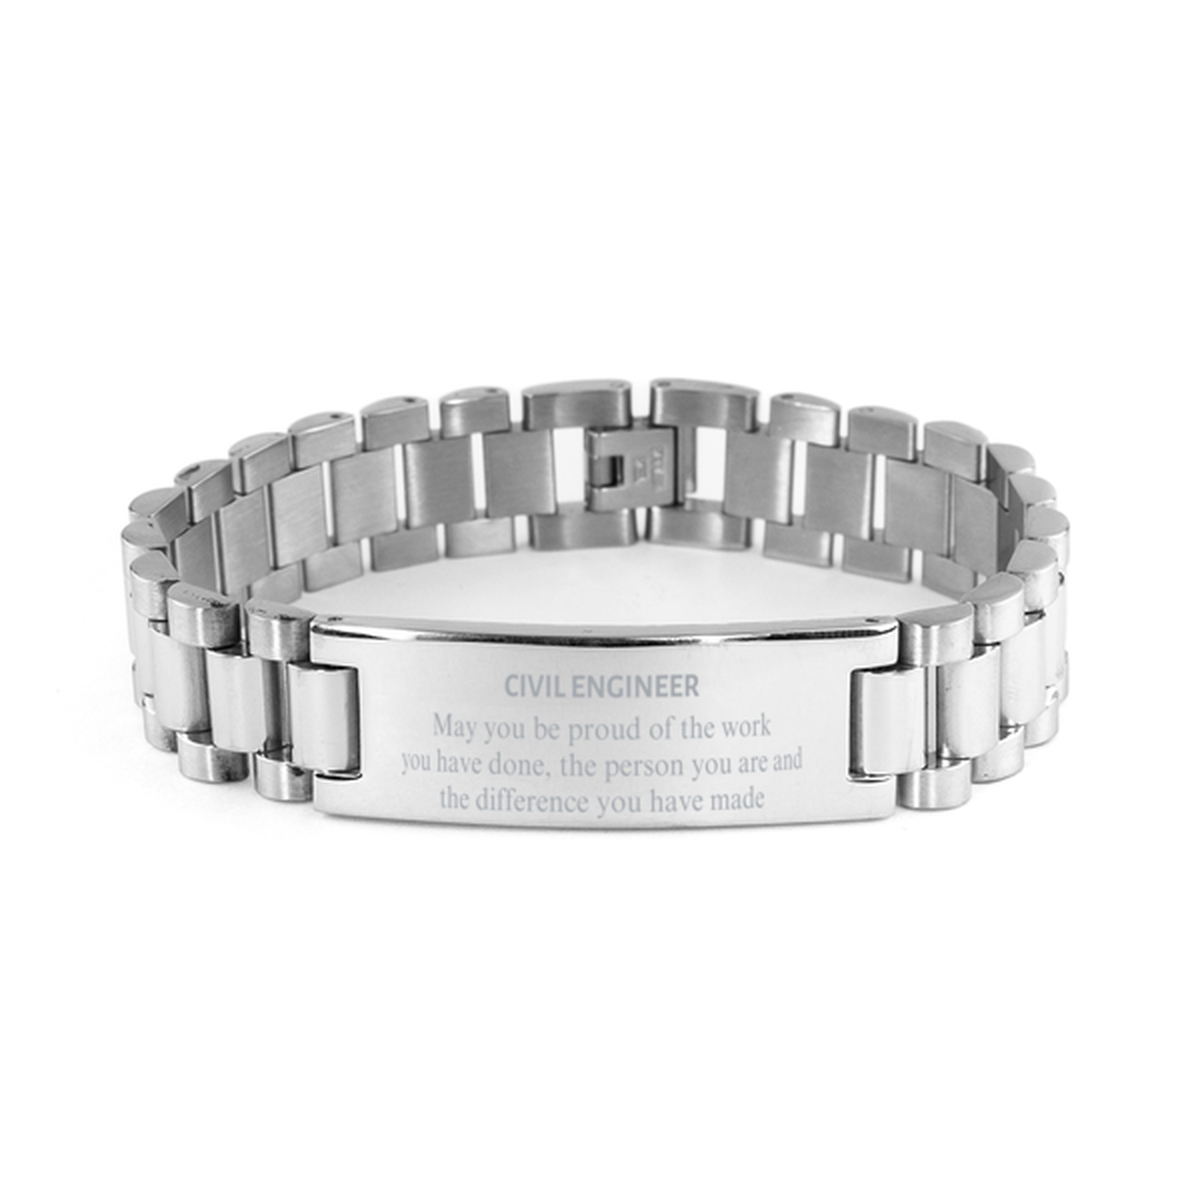 Civil Engineer May you be proud of the work you have done, Retirement Civil Engineer Ladder Stainless Steel Bracelet for Colleague Appreciation Gifts Amazing for Civil Engineer